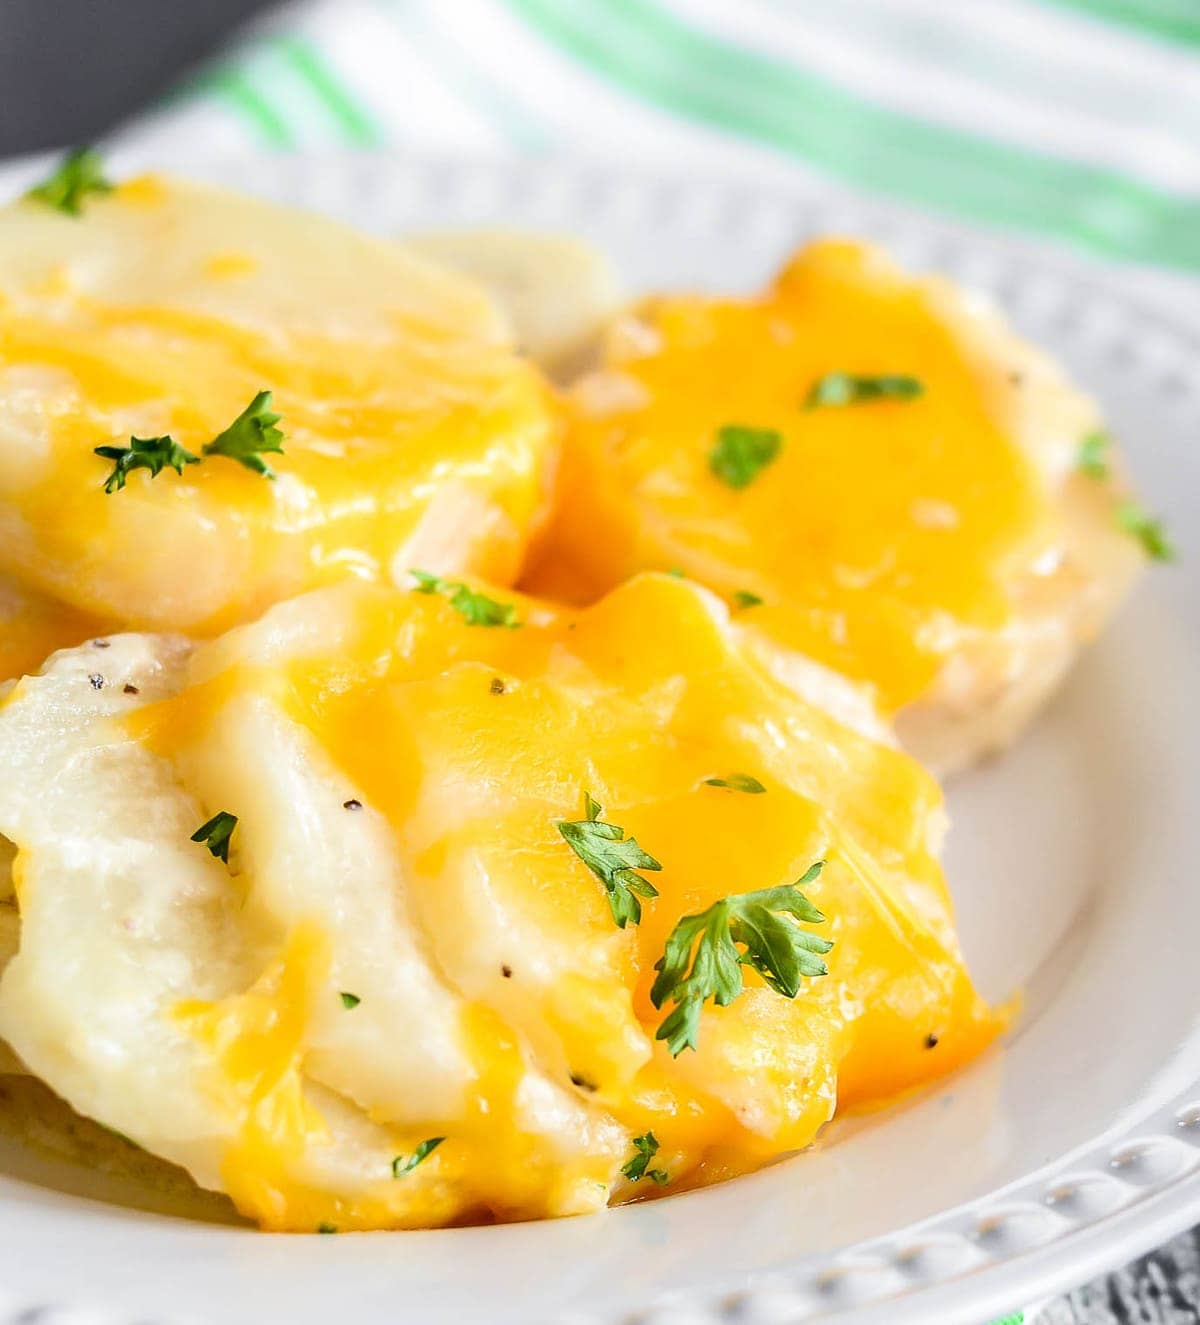 Crockpot side dishes - crockpot scalloped potatoes covered with cheese.